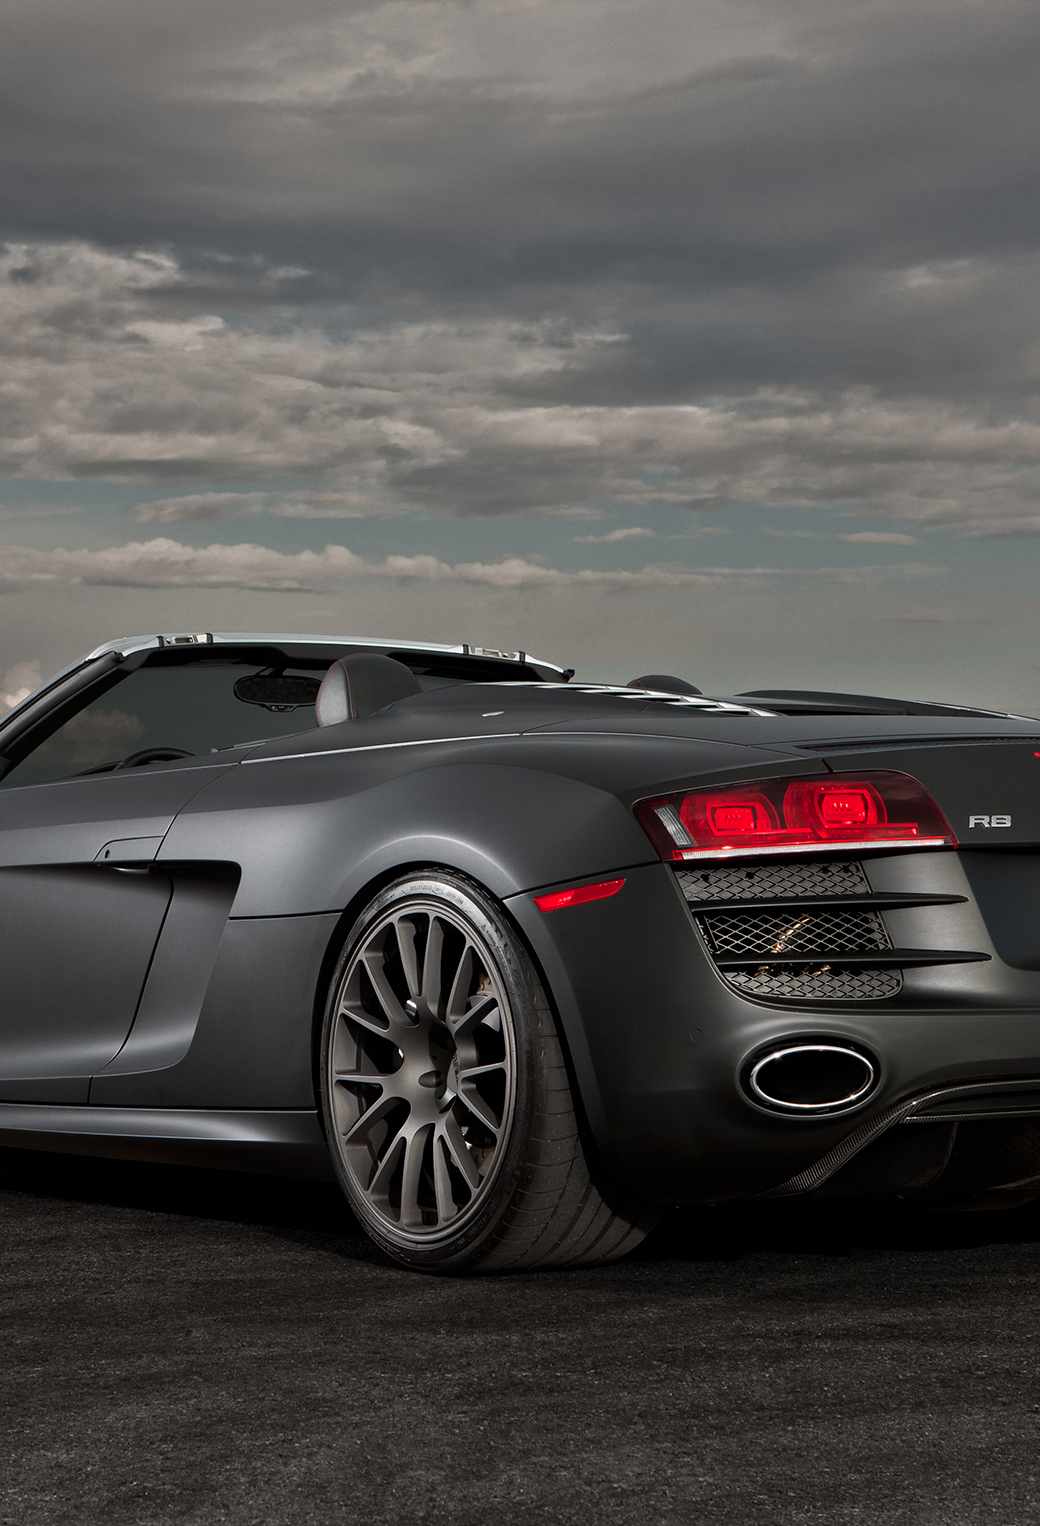 Audi R8 Wallpaper for iPhone Pro Max, X, 6